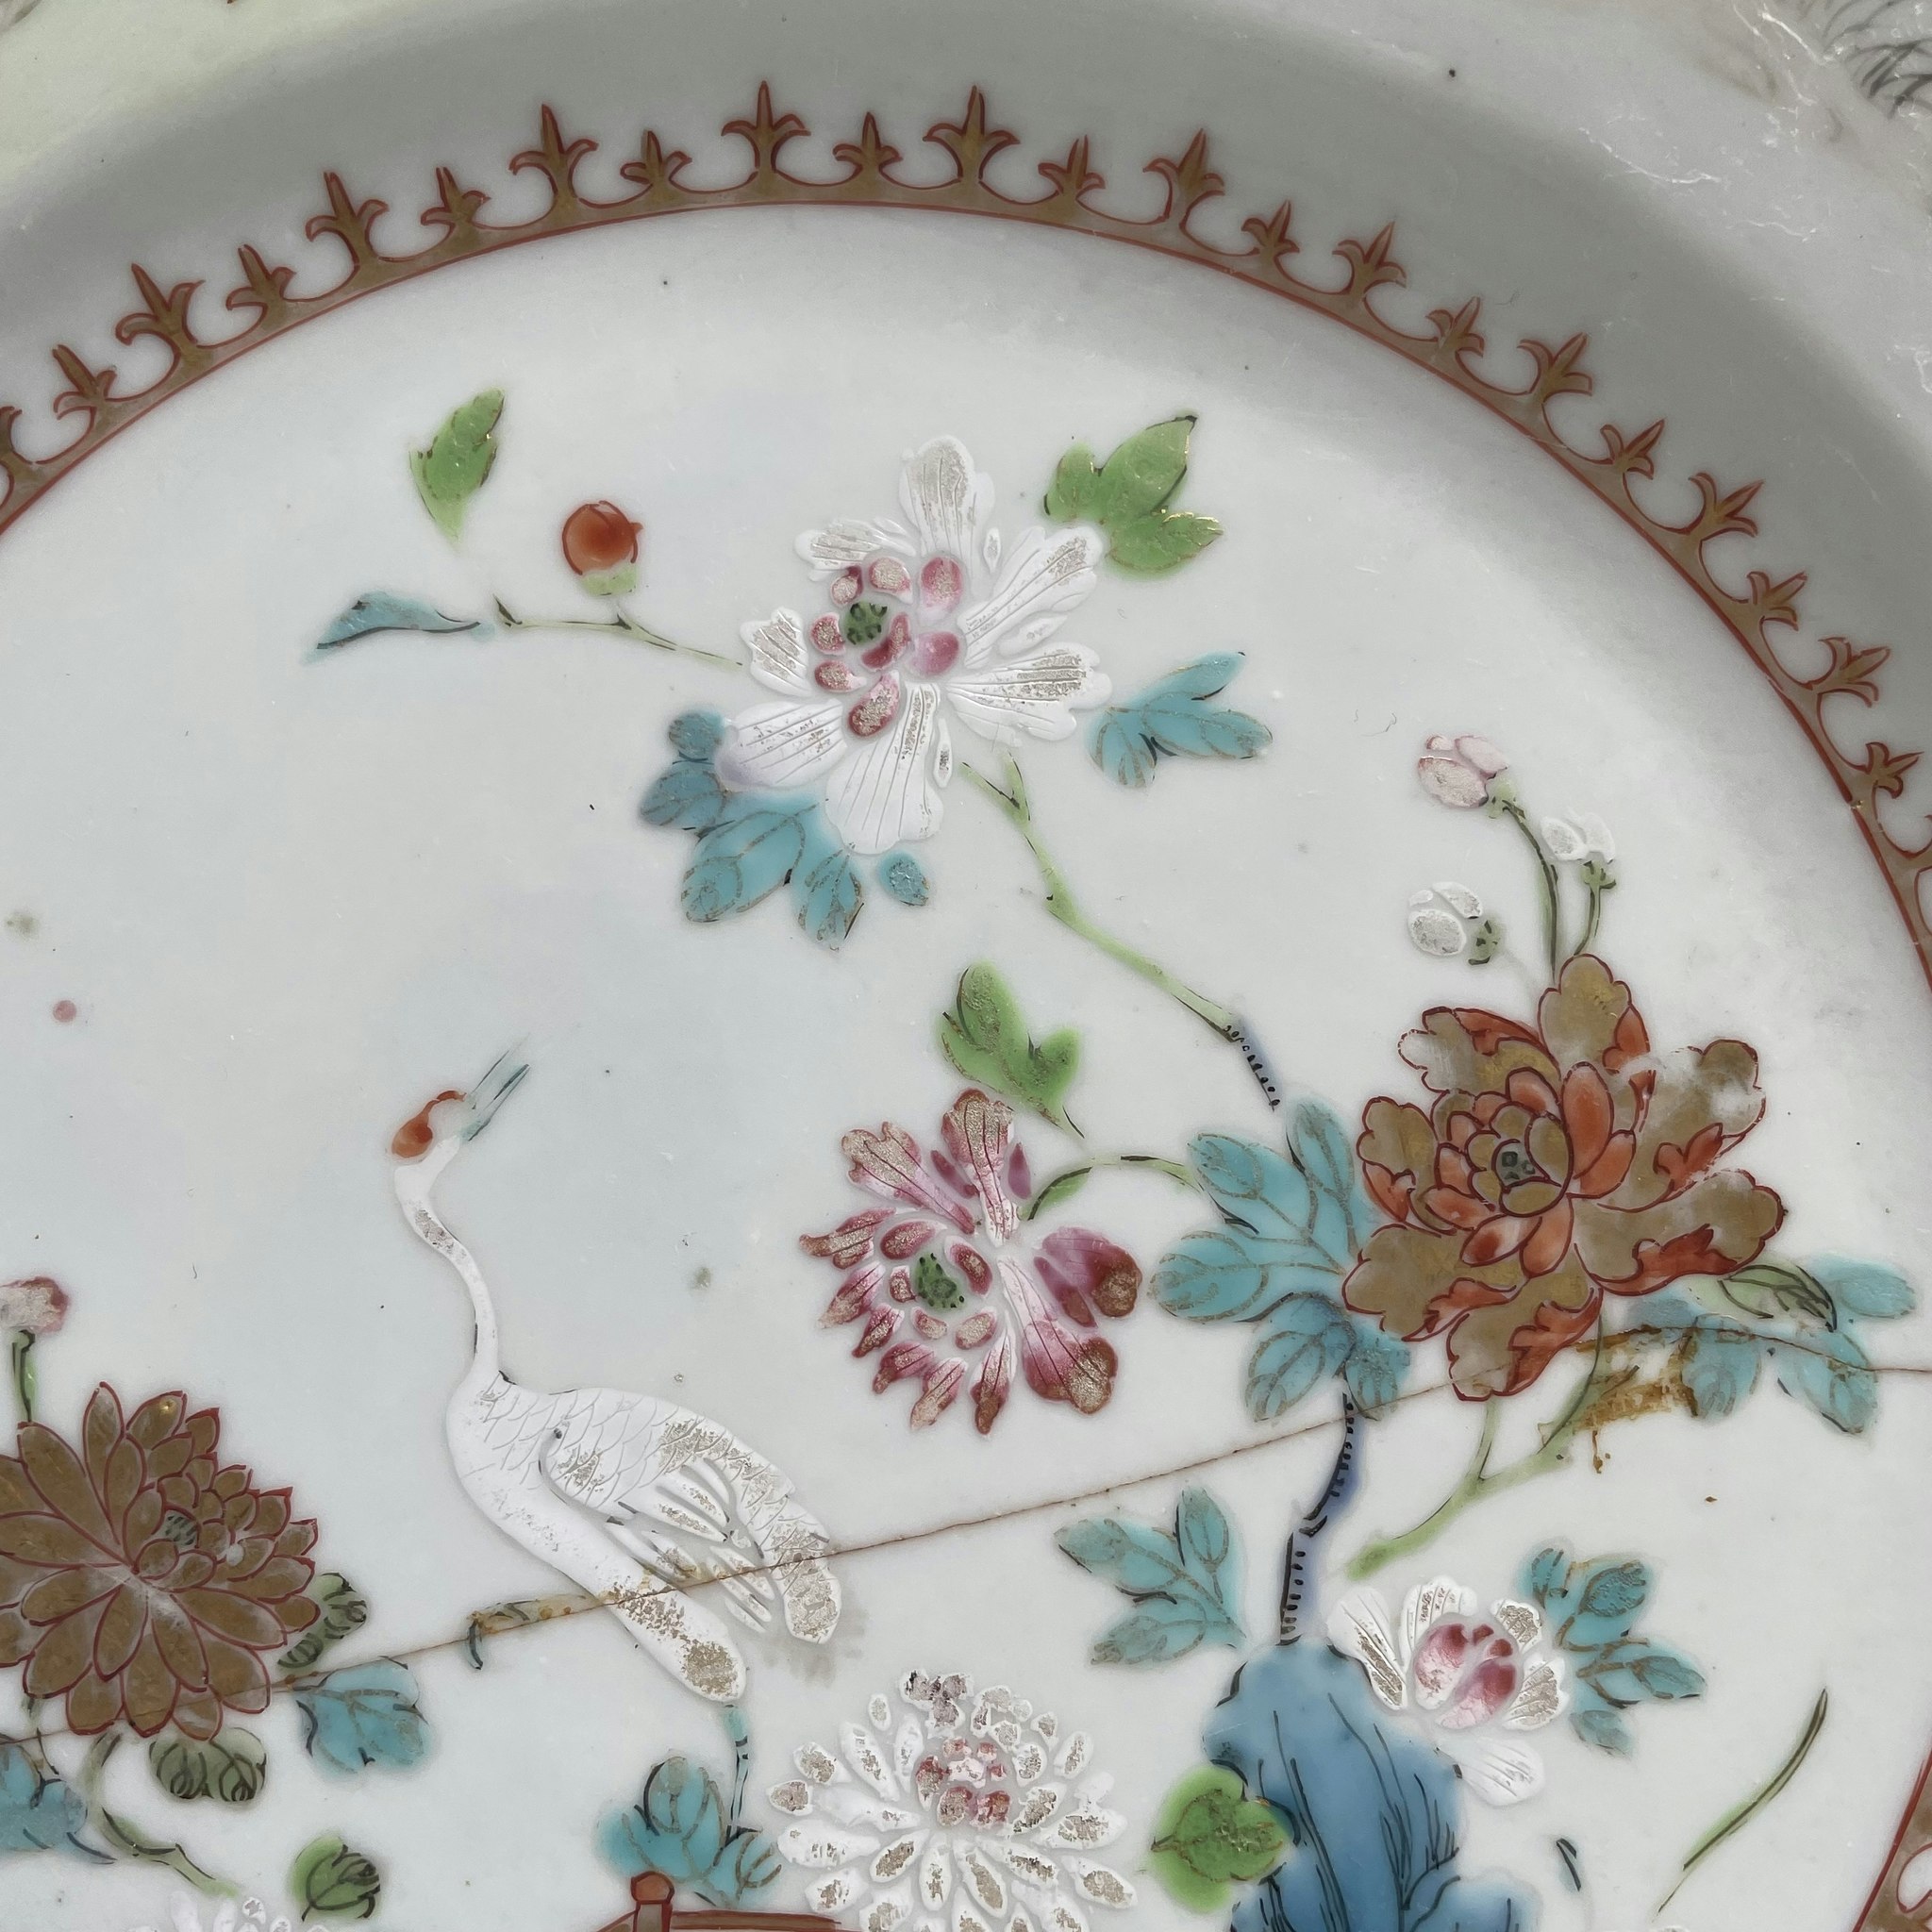 Chinese antique porcelain famille rose plate, Qianlong period, #1930